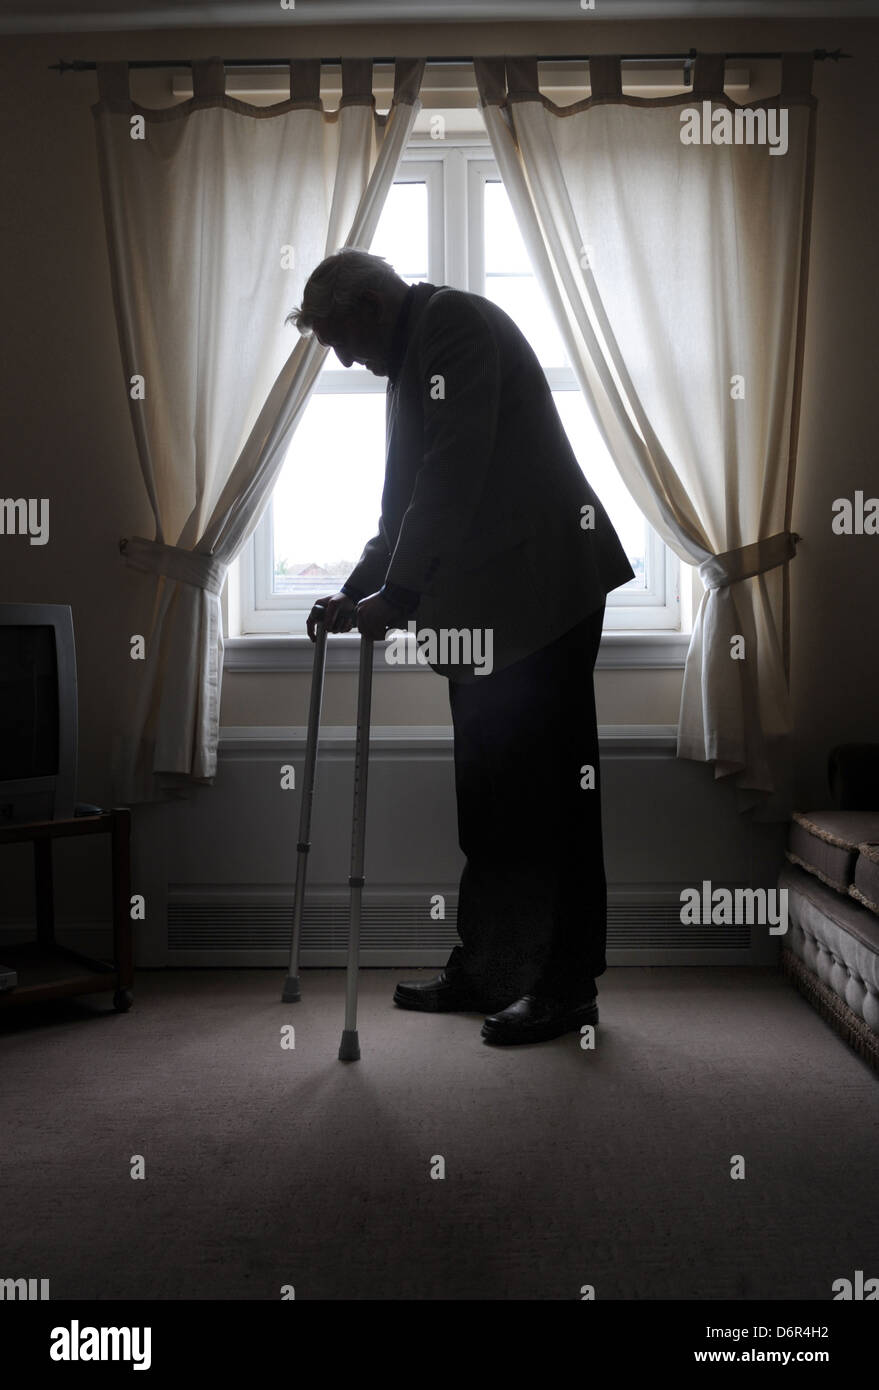 ELDERLY MAN WITH WALKING STICKS RE RETIREMENT DEPRESSION OLD AGE OAPS CAREHOME CARE INFIRM LONELY BENEFITS NURSING DISABILTY UK Stock Photo